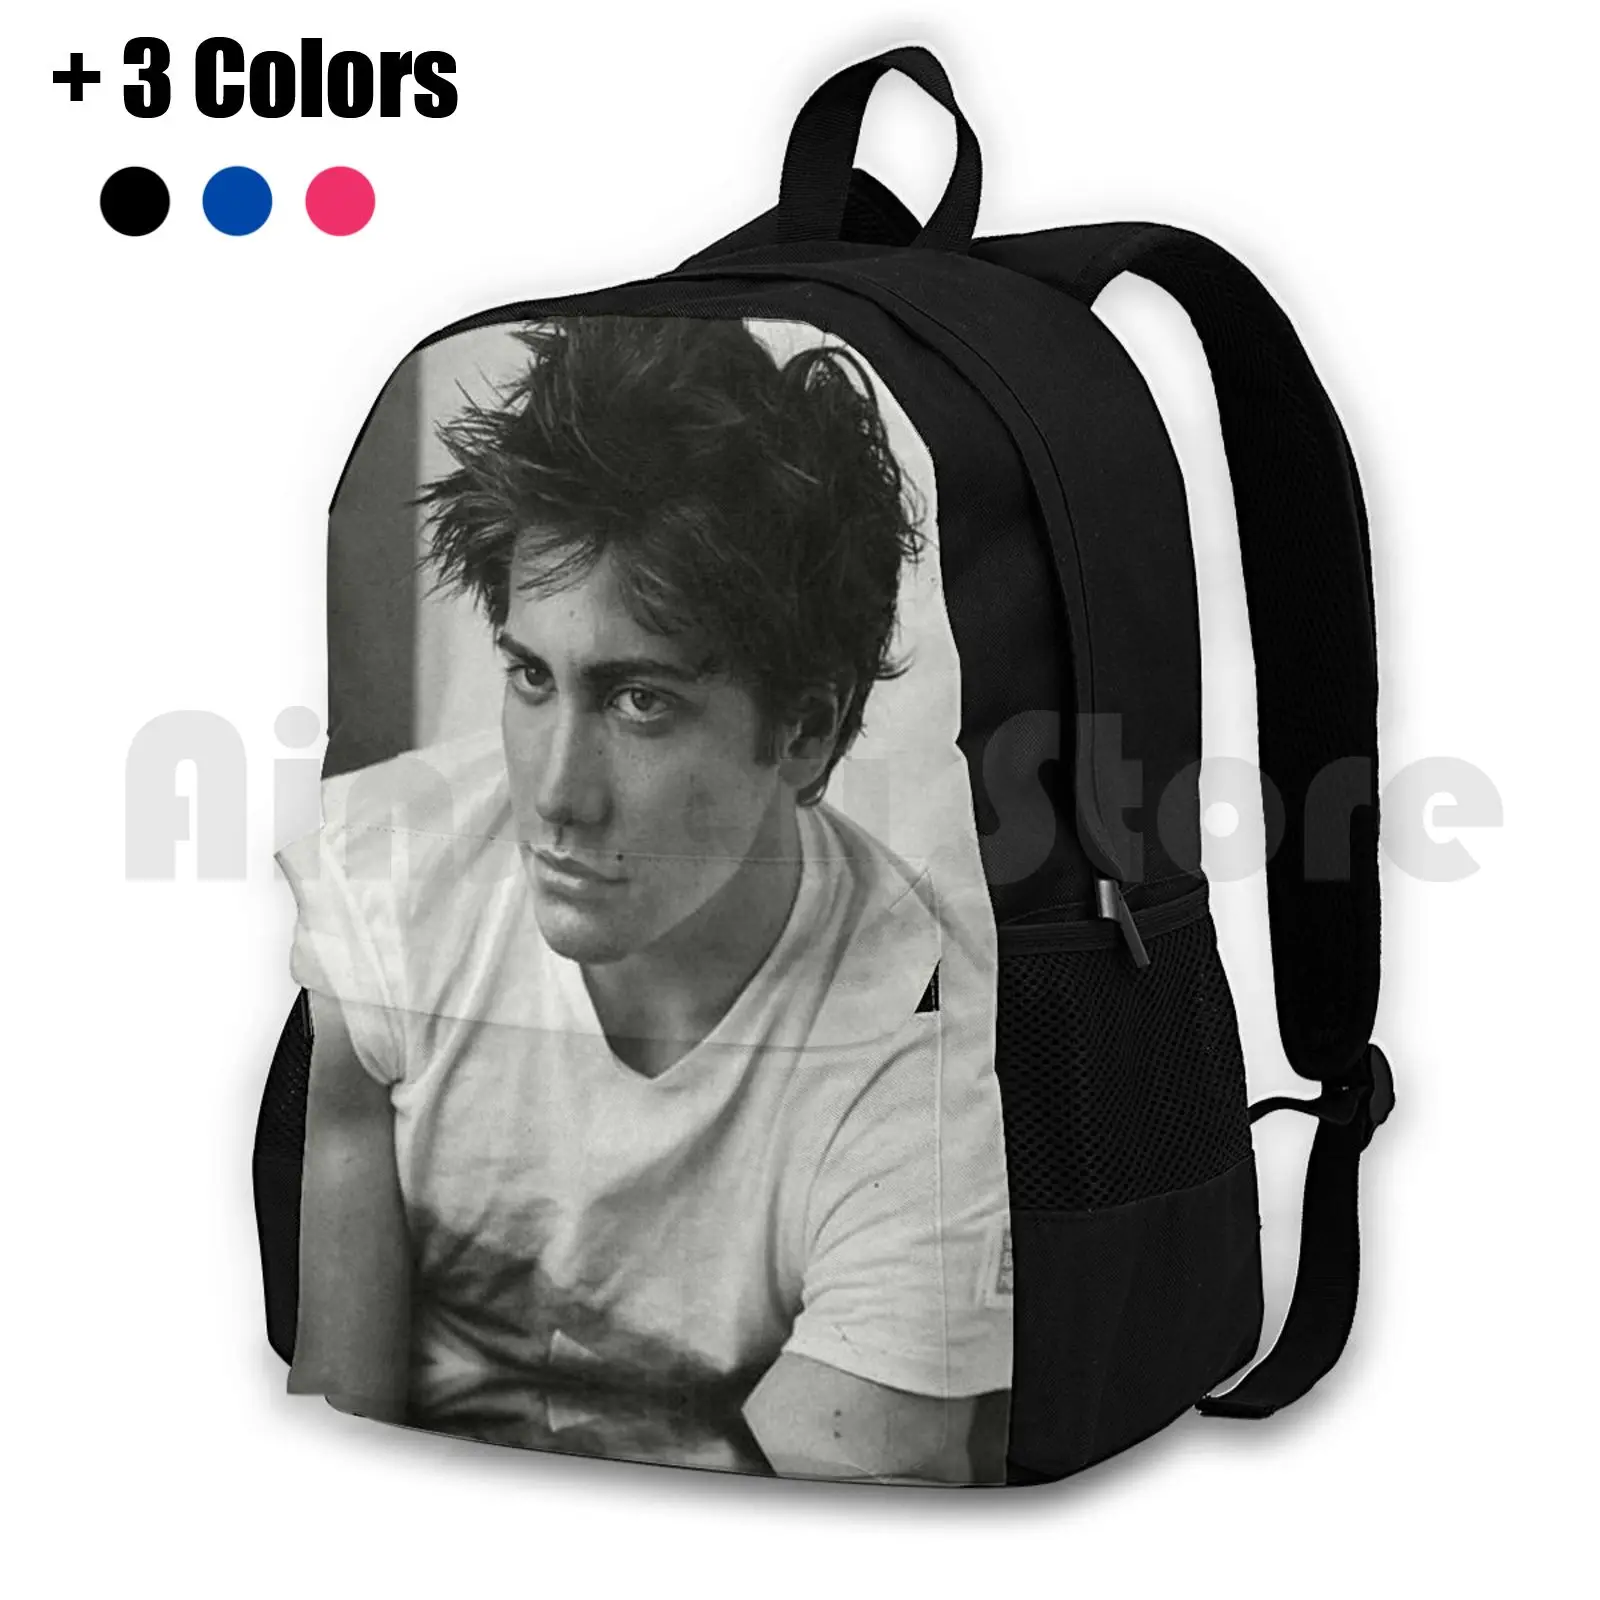 

Young Jake Gyllenhaal Outdoor Hiking Backpack Riding Climbing Sports Bag Young Actor Jake Gyllenhaal 90S 1990 American Usa